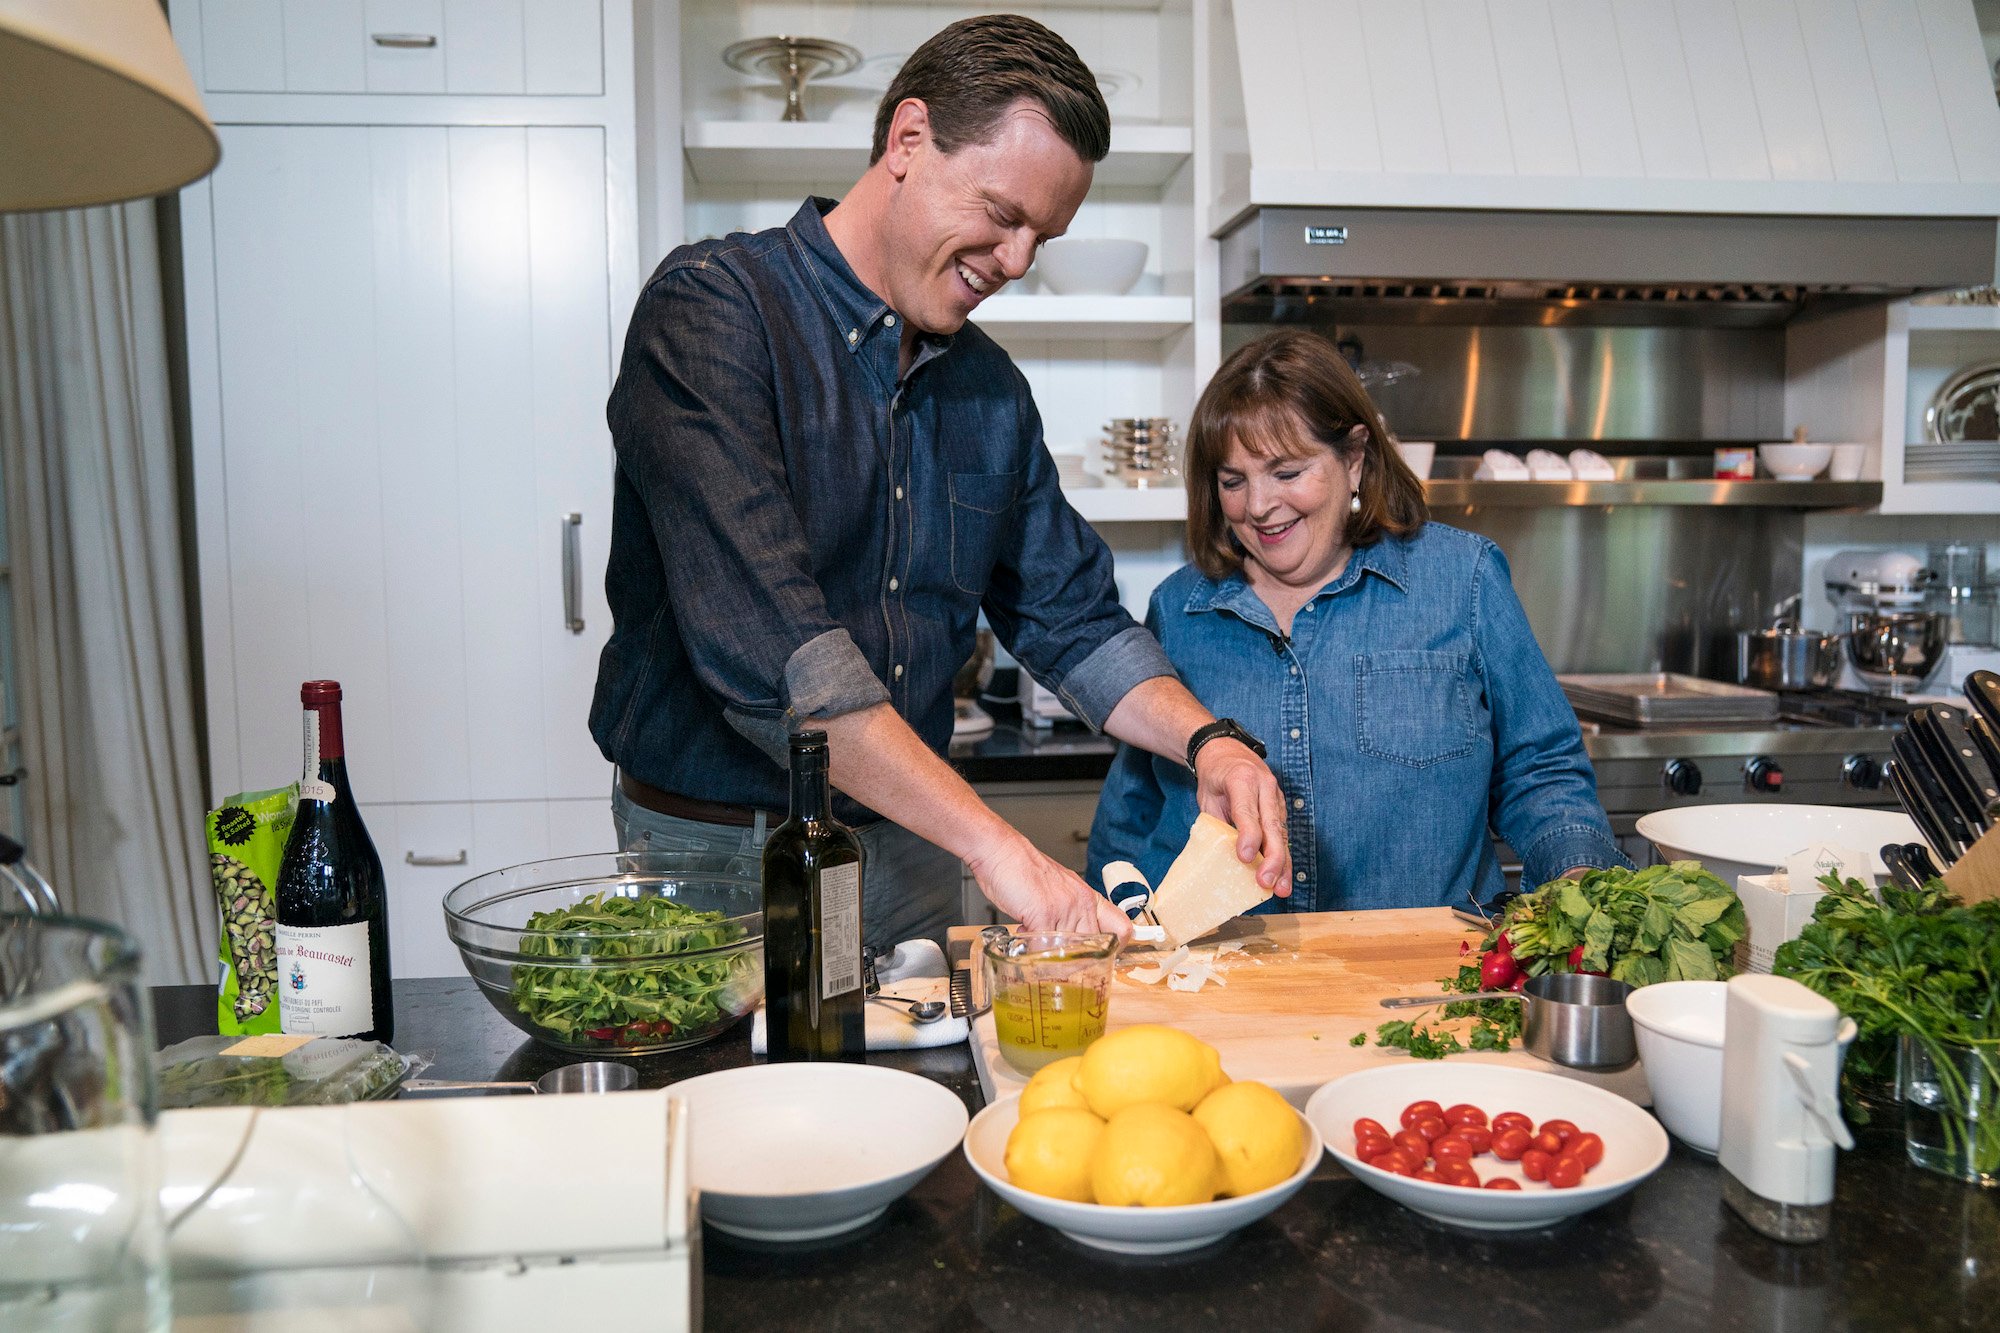 (L-R) Willie Geist and Ina Garten in a kitchen, laughing and preparing a meal